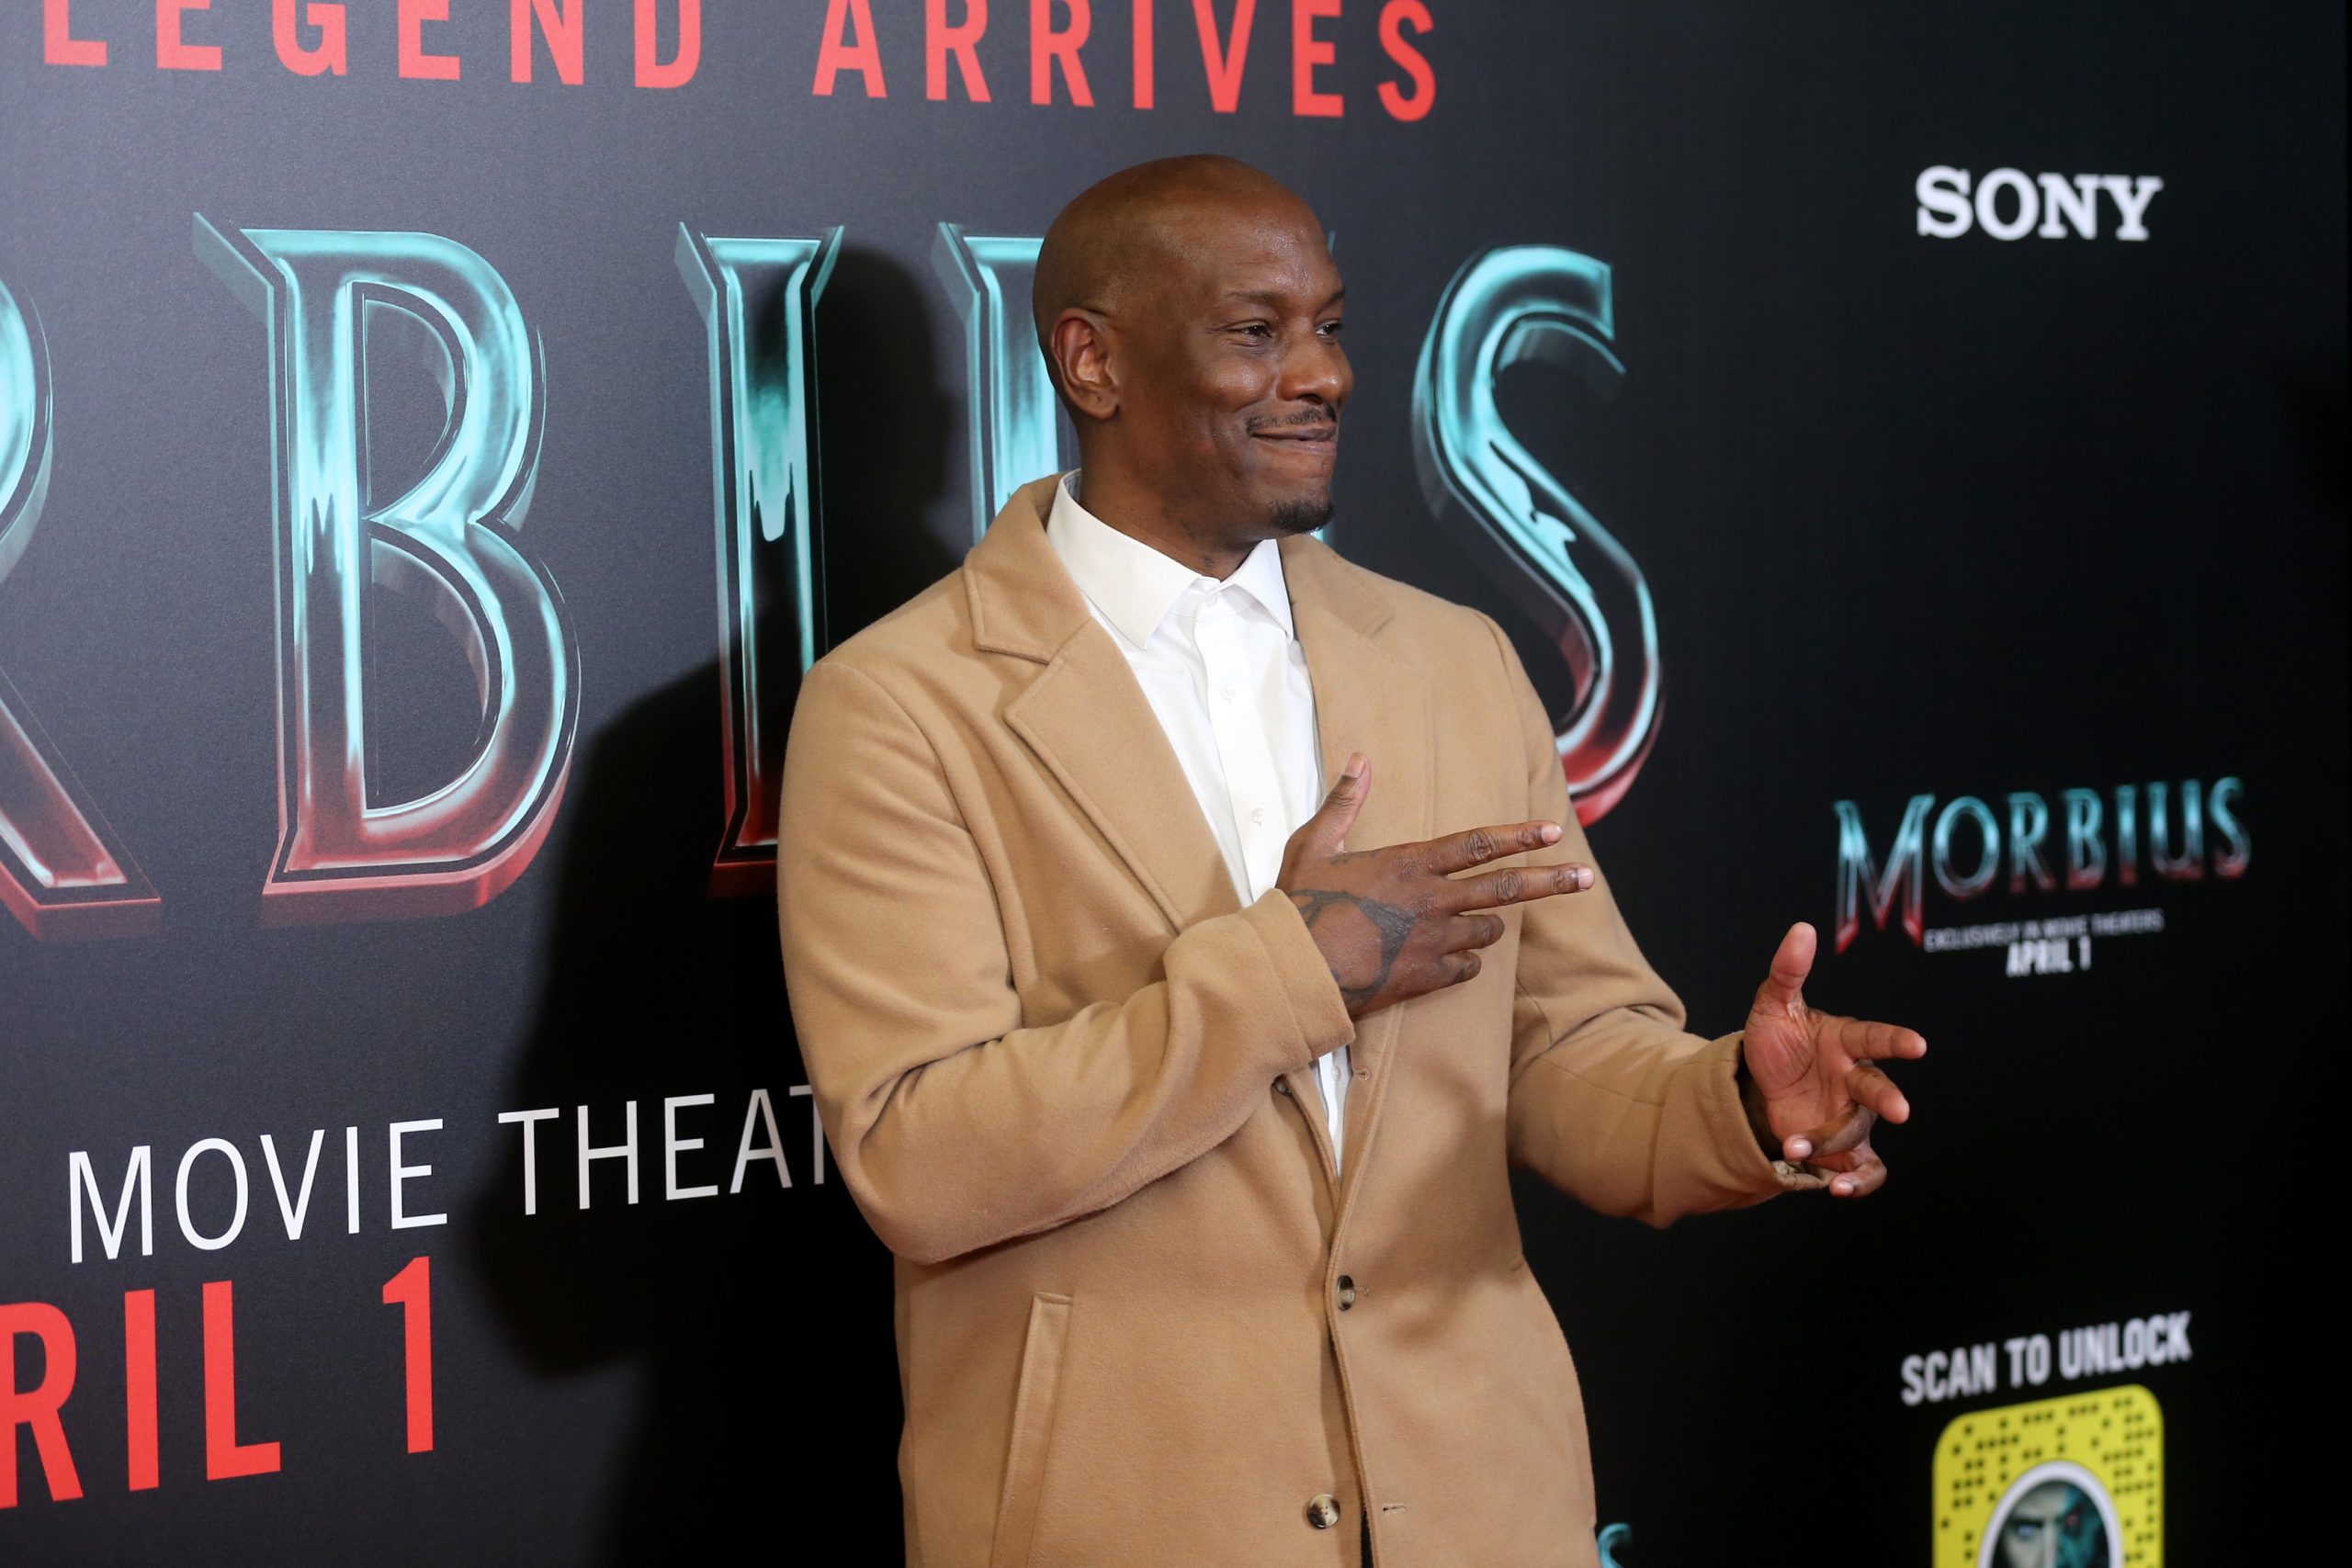 Tyrese Gibson Got Fooled by Fake ‘Morbius’ Review from Martin Scorsese